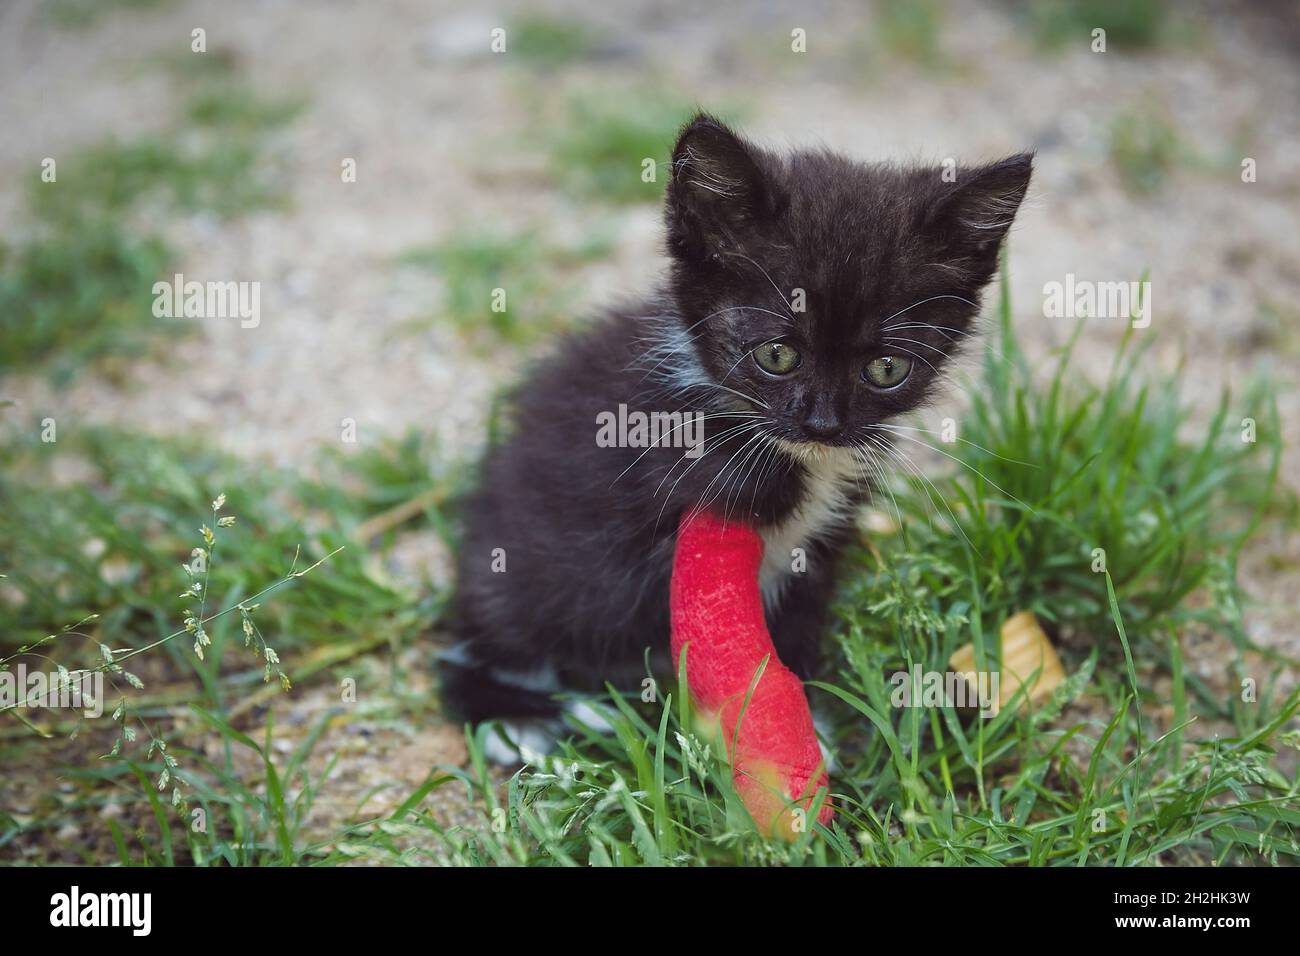 Kitten with injured leg in red plaster cast, playing in a grass.  Animal healthcare concept Stock Photo